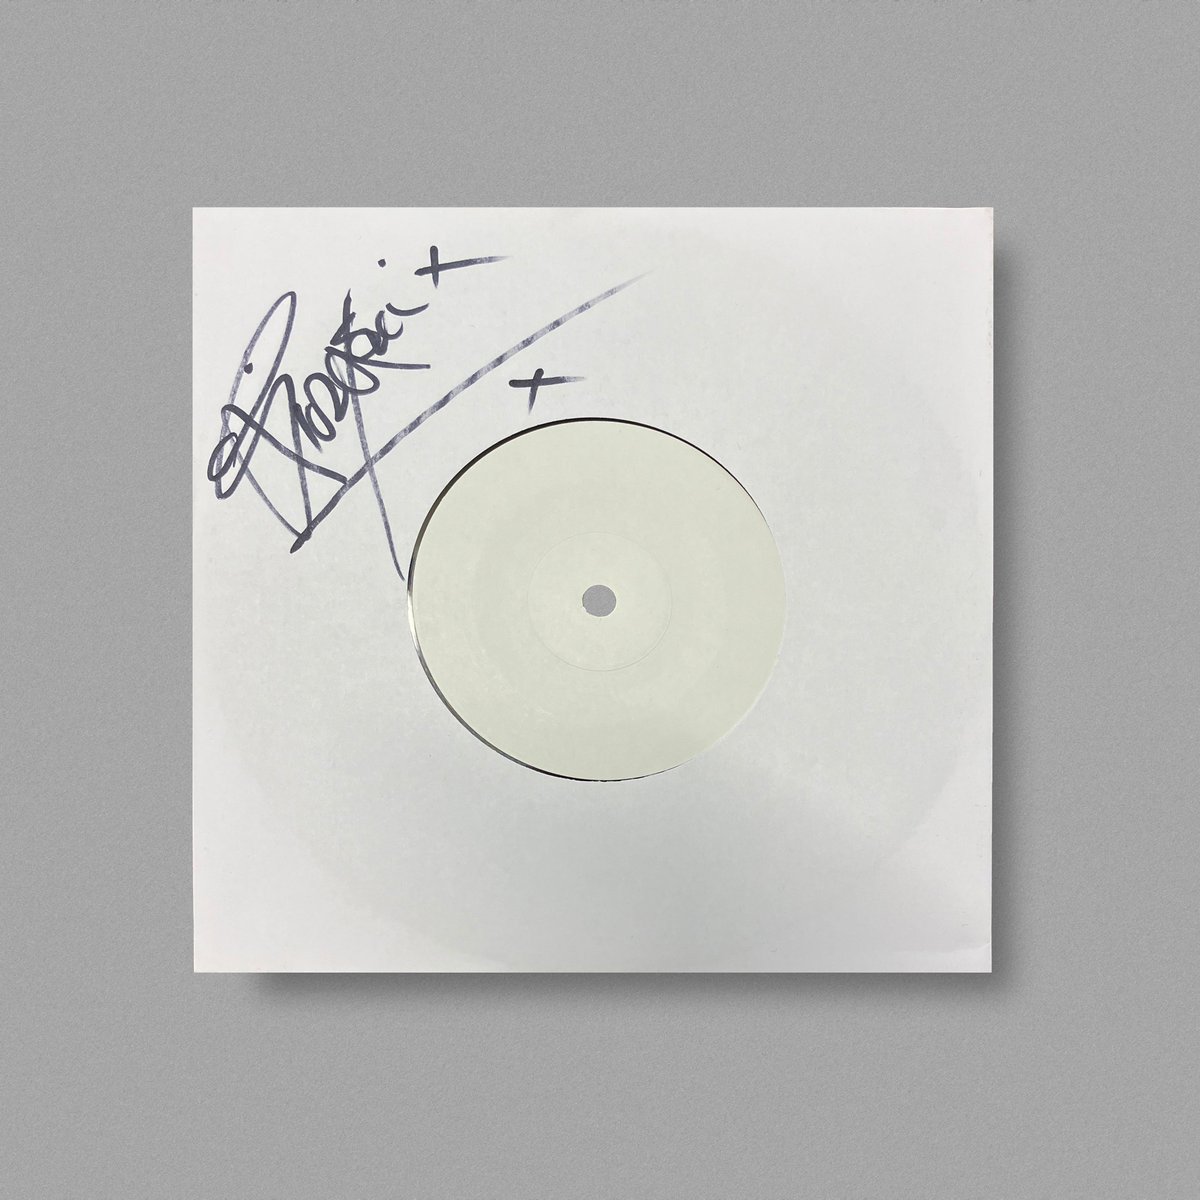 📣 Have you heard … Limited test pressings for this year's Secret 7' tracks have been added to @peggy to raise vital funds for @WarChildUK! Some are signed by the artists and a few even come with artist-designed sleeves! 🔗Bid now: peggy.com/@secret_7